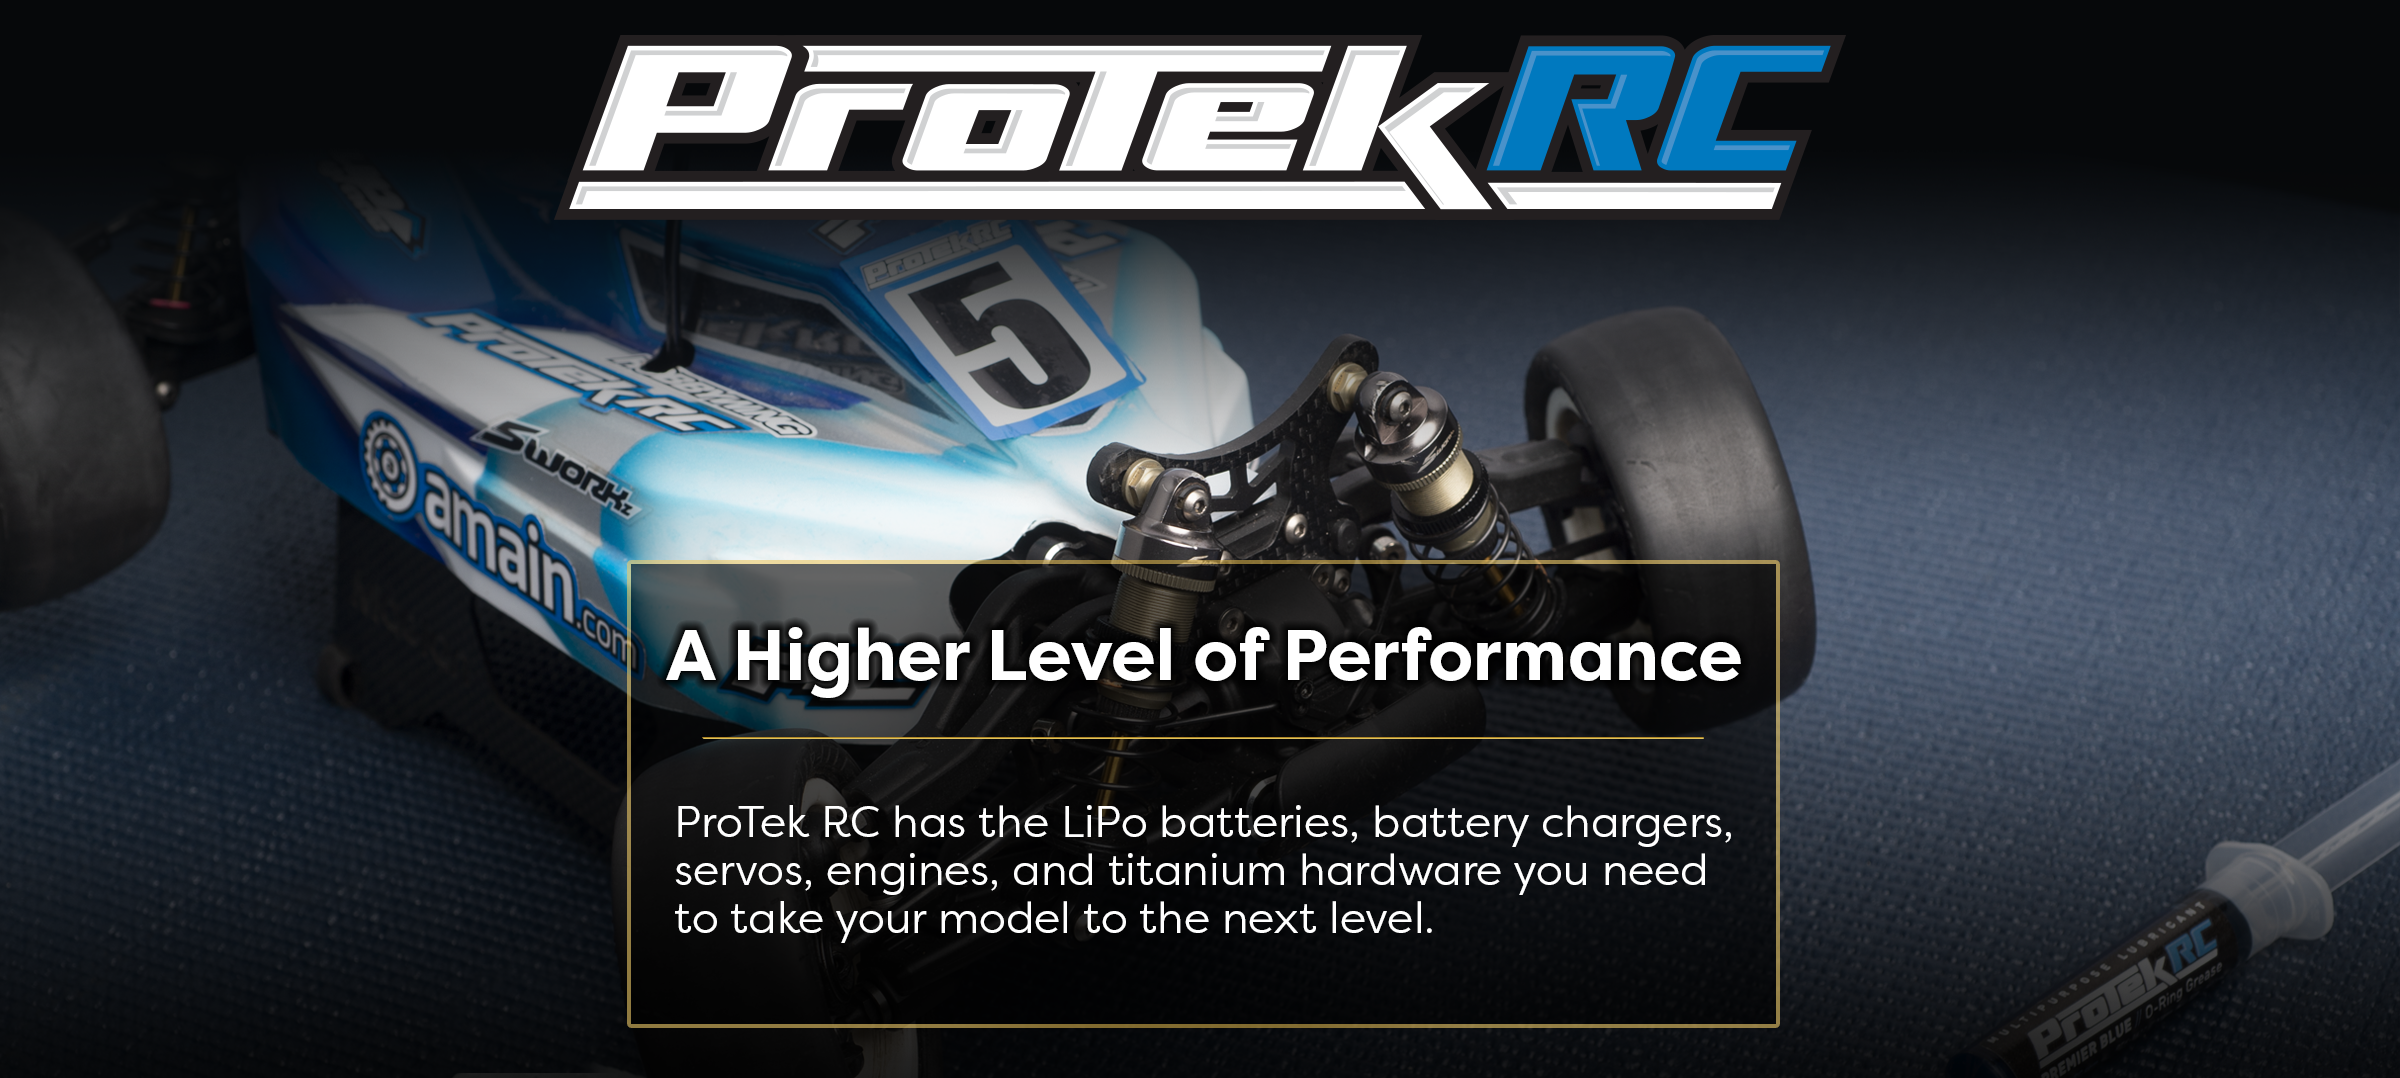 ProTek RC has the LiPo batteries, battery chargers, servos, engines, and titanium hardware you need to take your model to the next level.